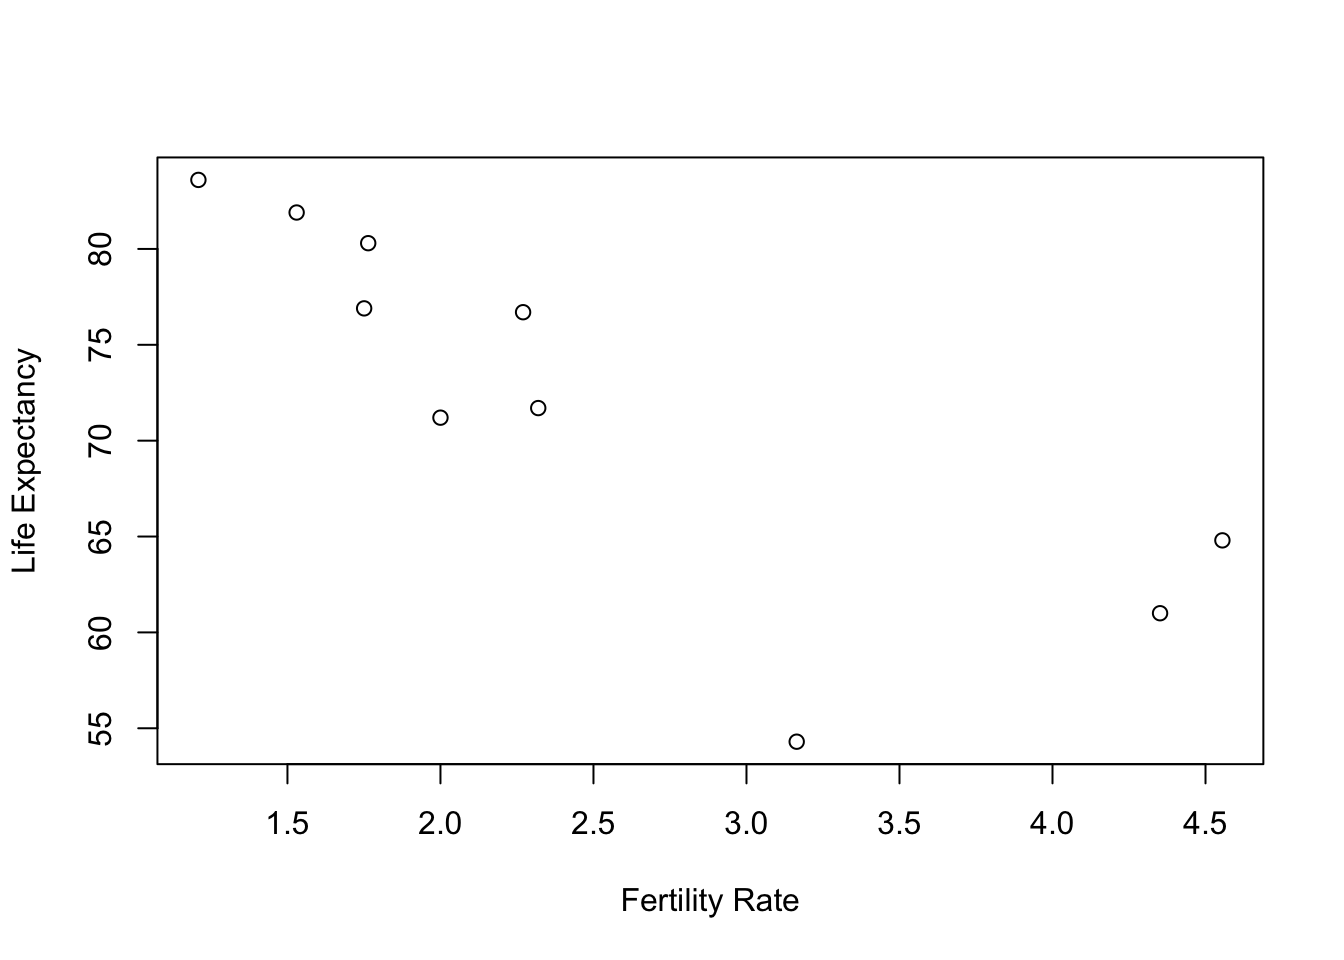 Fertily Rate and Life Expectancy in Ten Randmomly Selected Countries